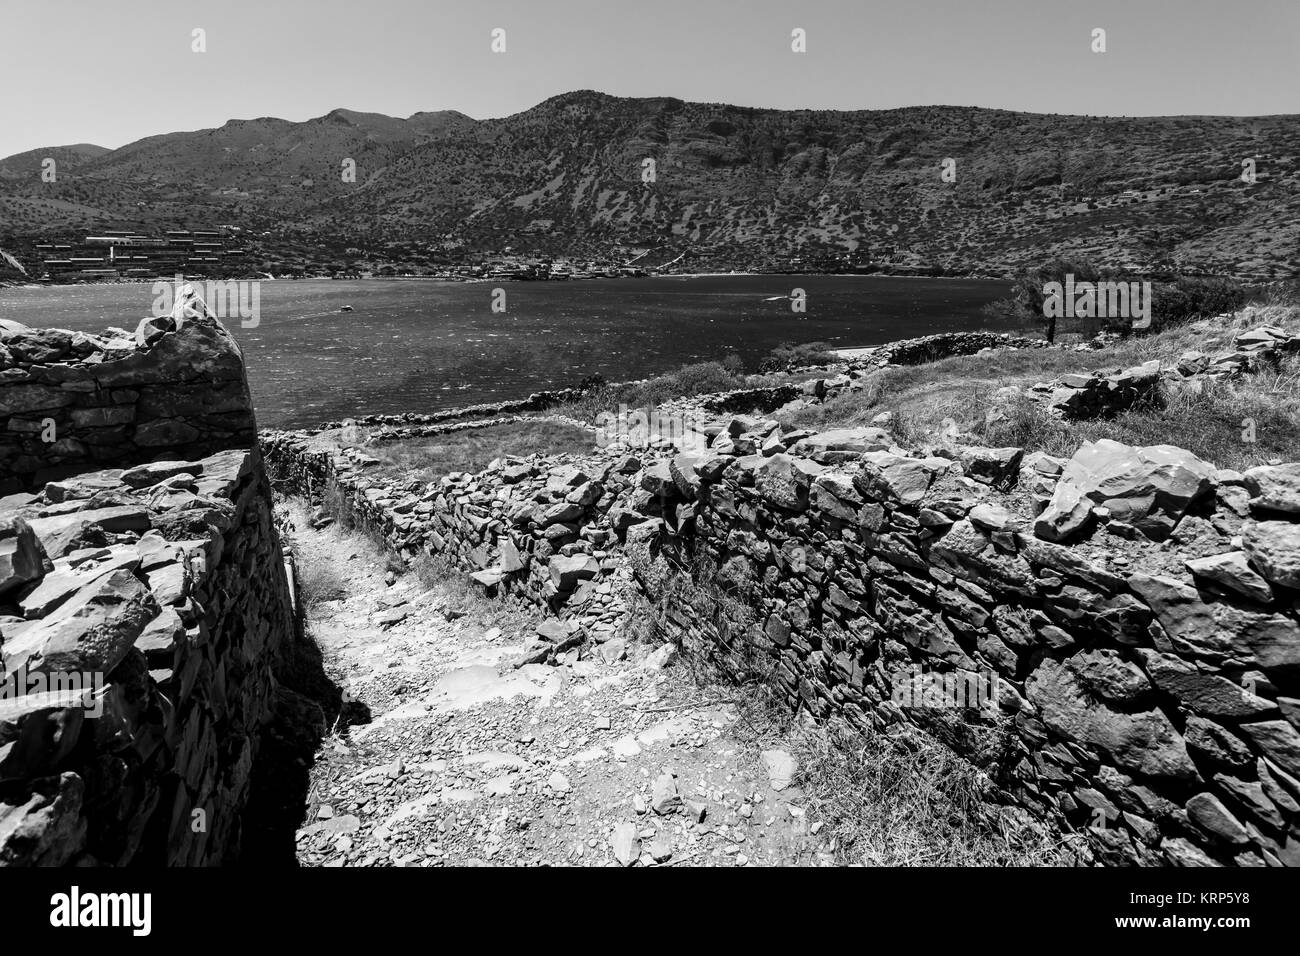 View of the Gulf of Elounda from a fortress on Spinalonga island. Black and white. Stock Photo